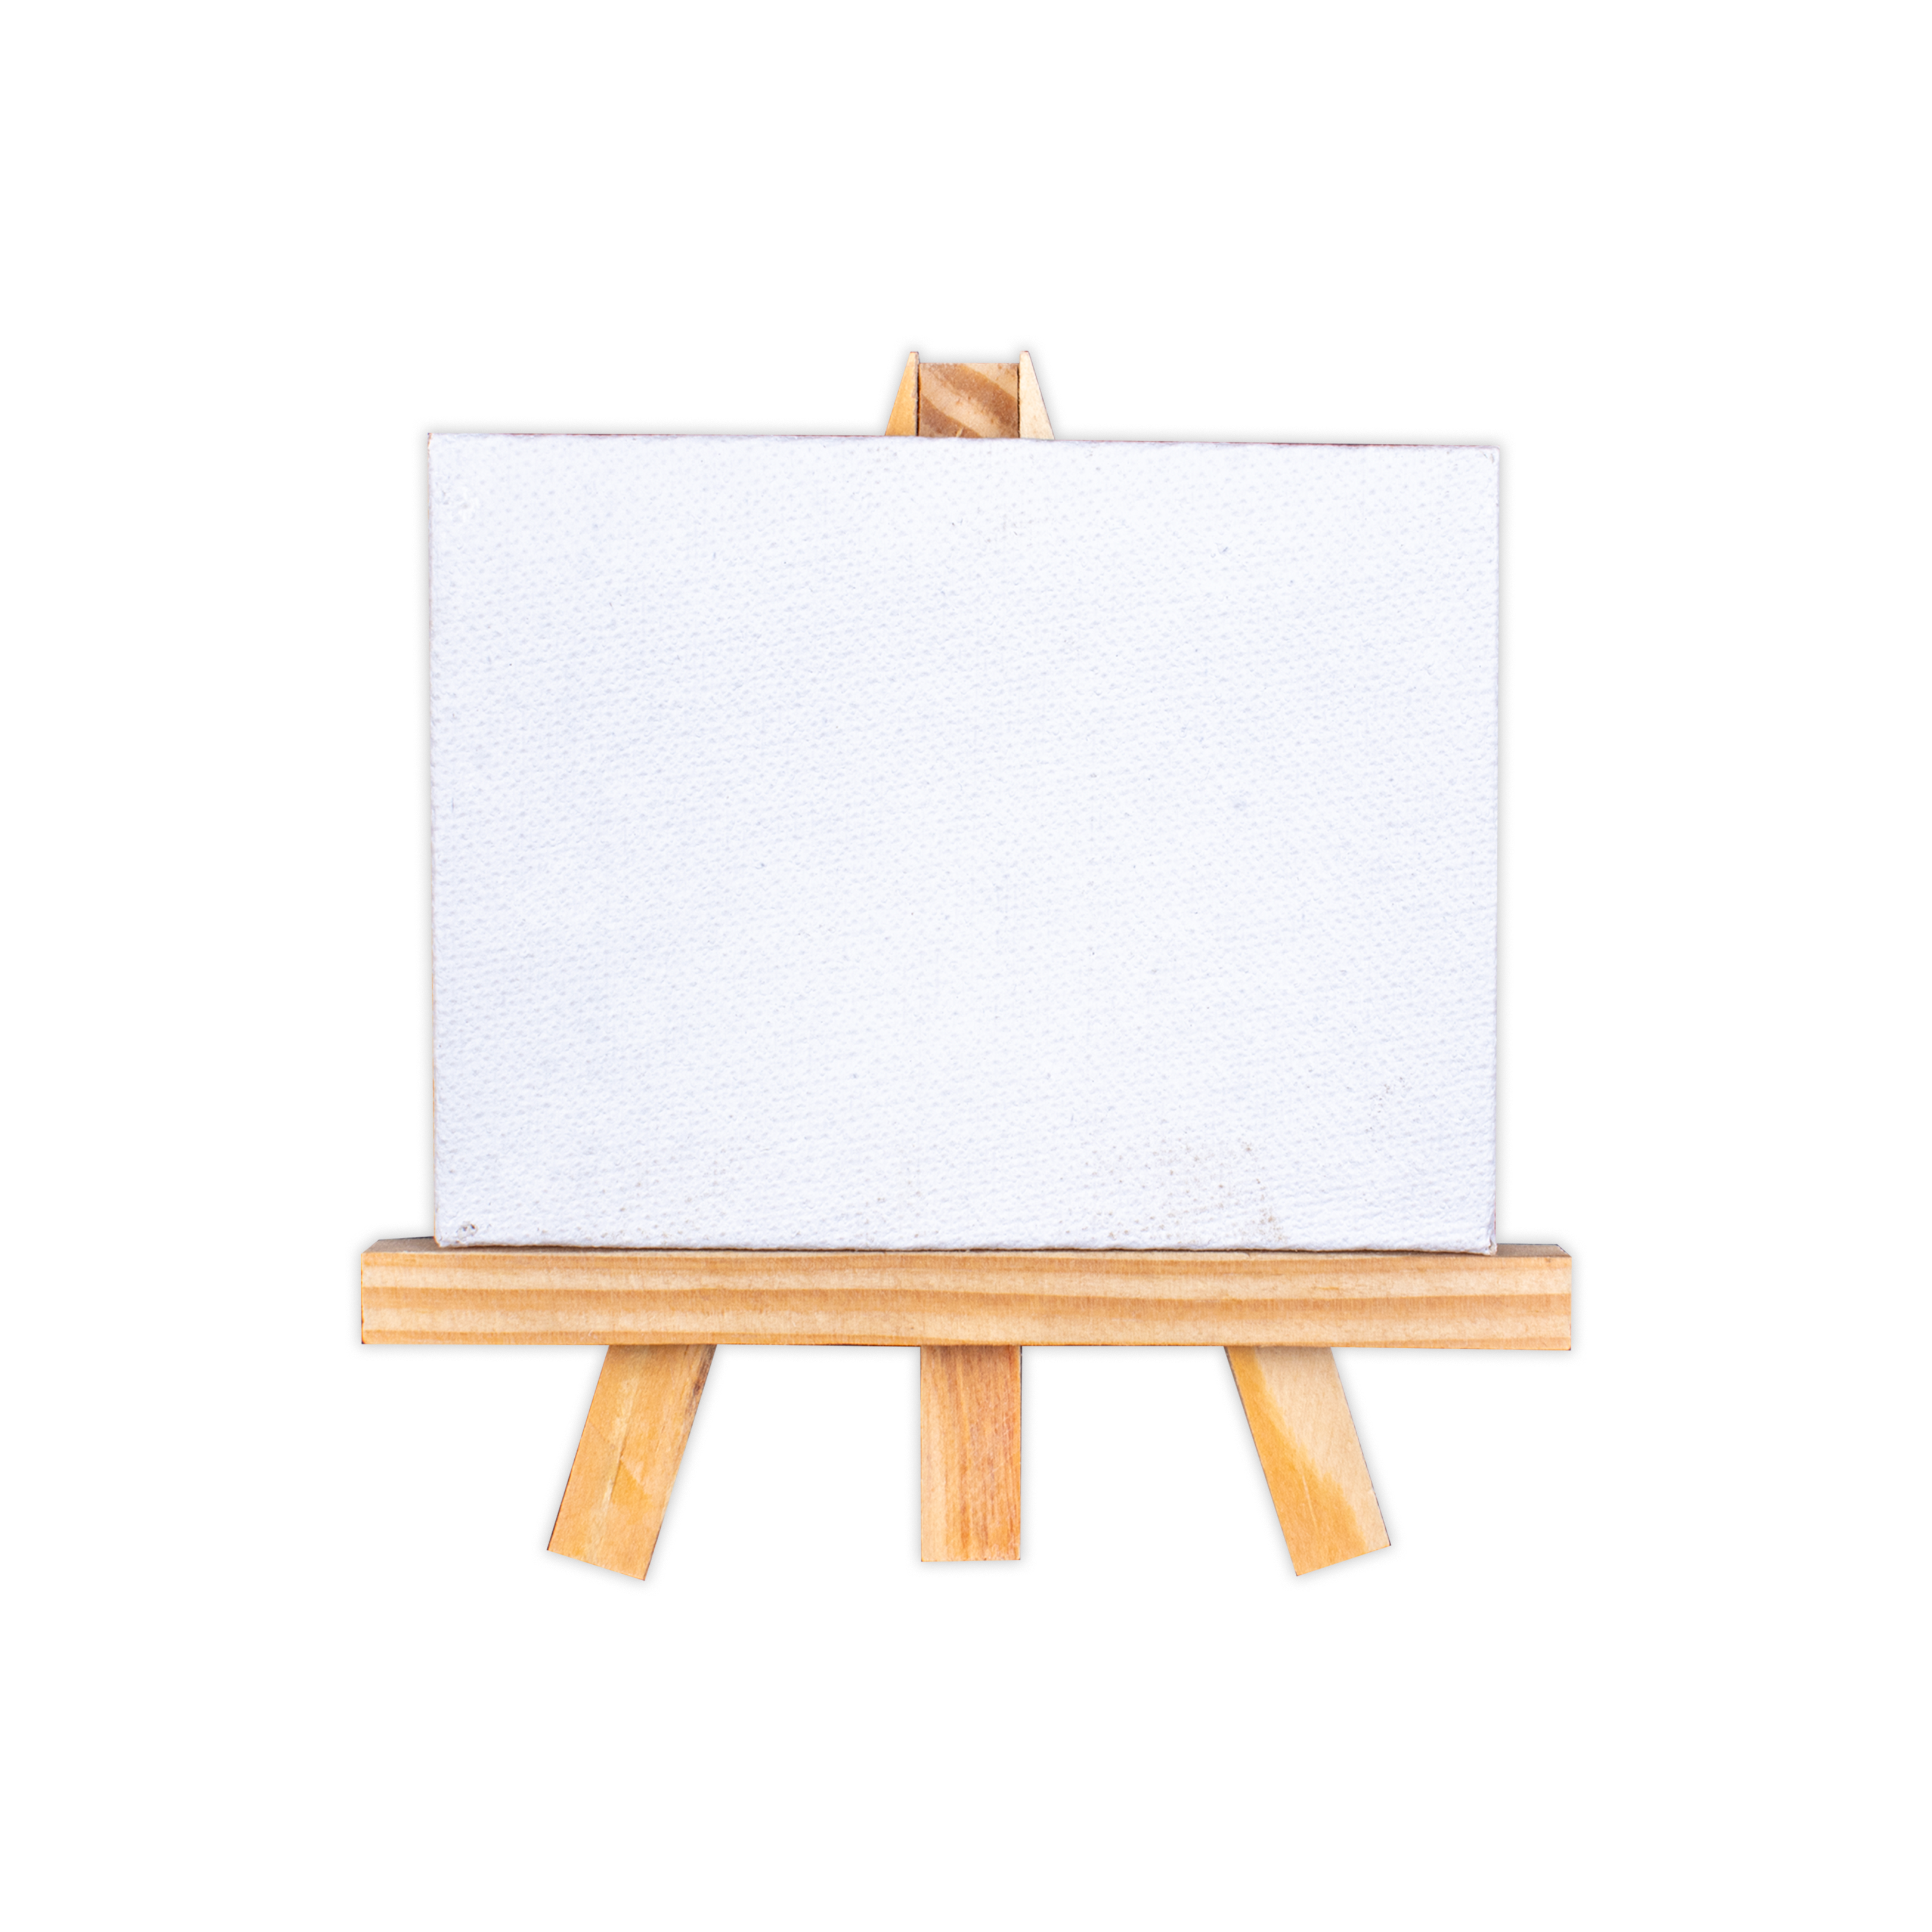 Wooden Mini Easel With Canvas Easel Size 11cm Canvas Size 10 X 7cm Set of 5pc